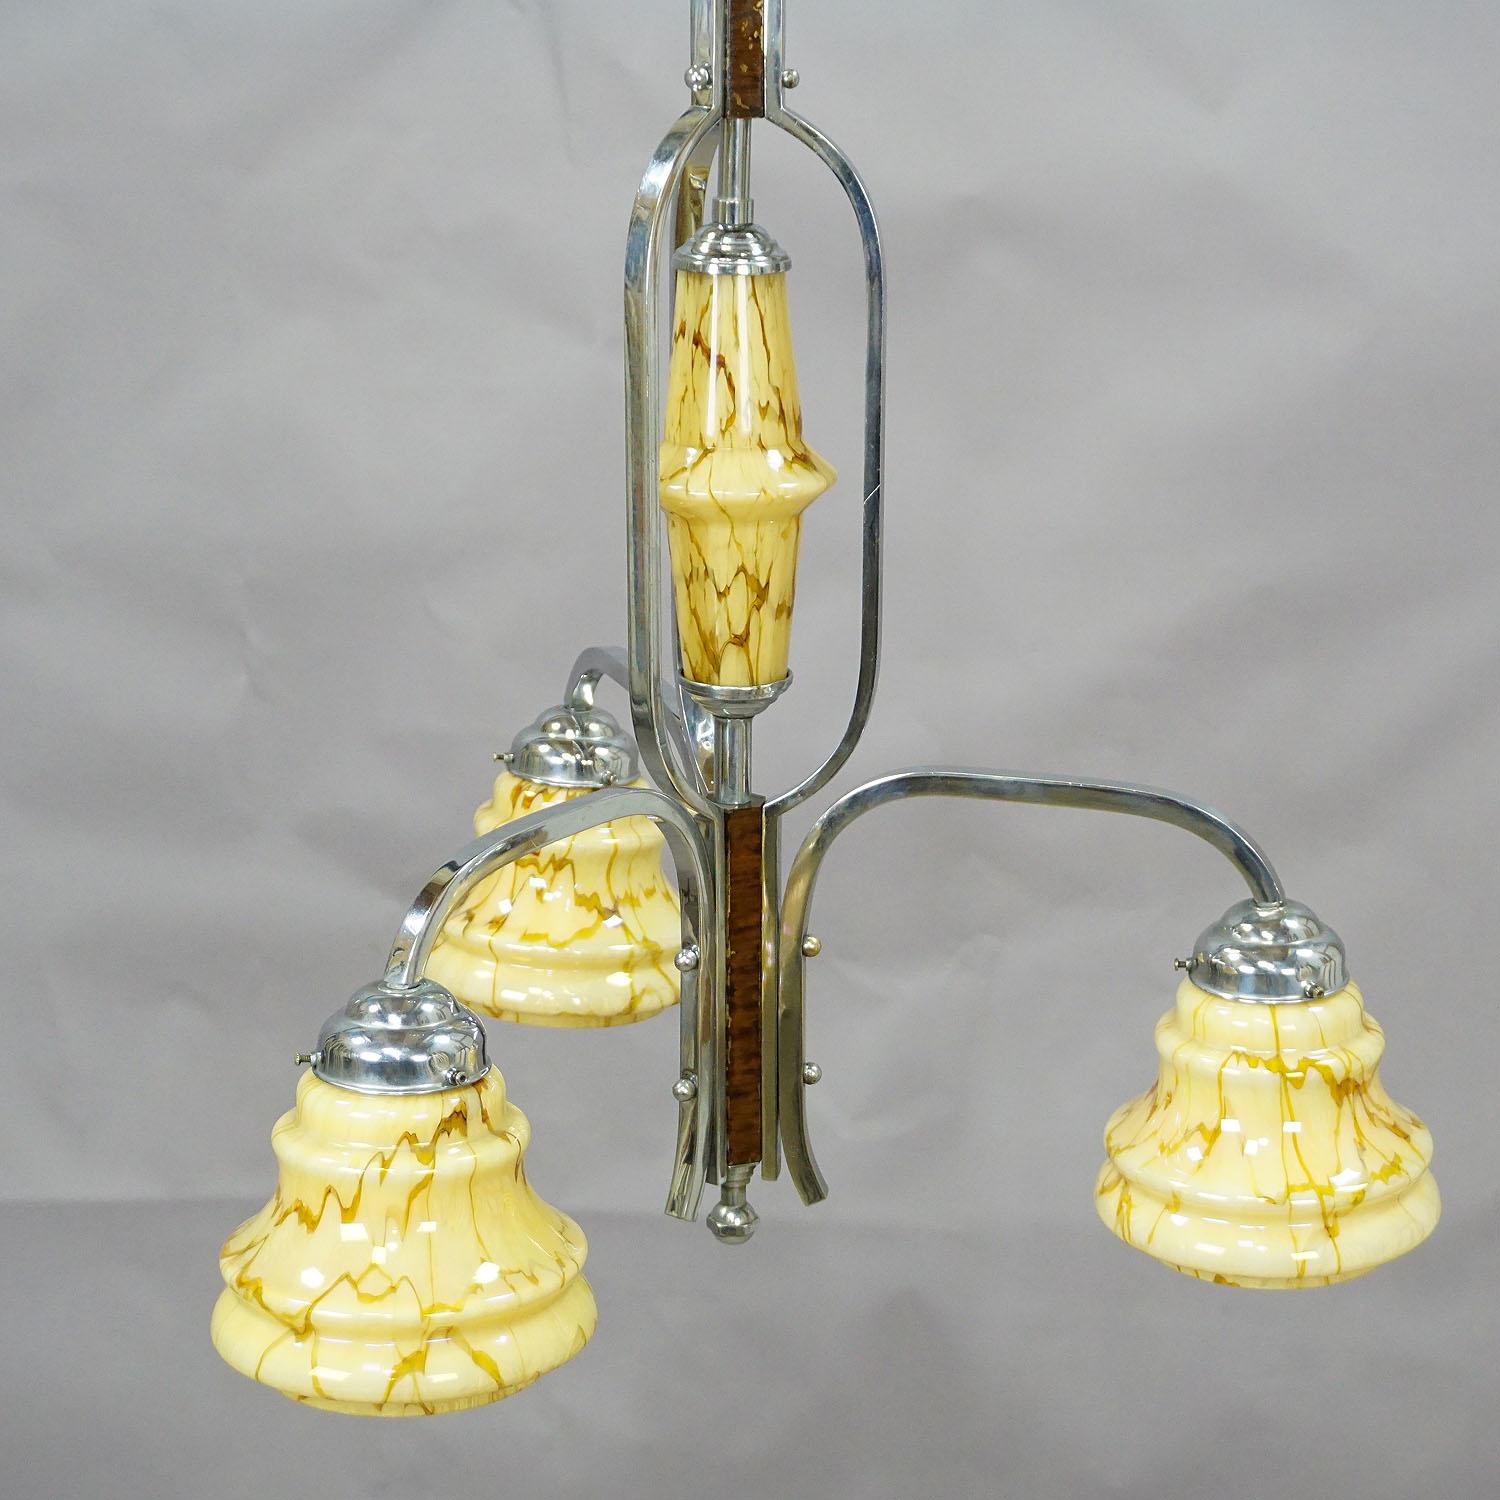 Bauhaus Antique Art Deco Chandelier with Three Glass Shades For Sale